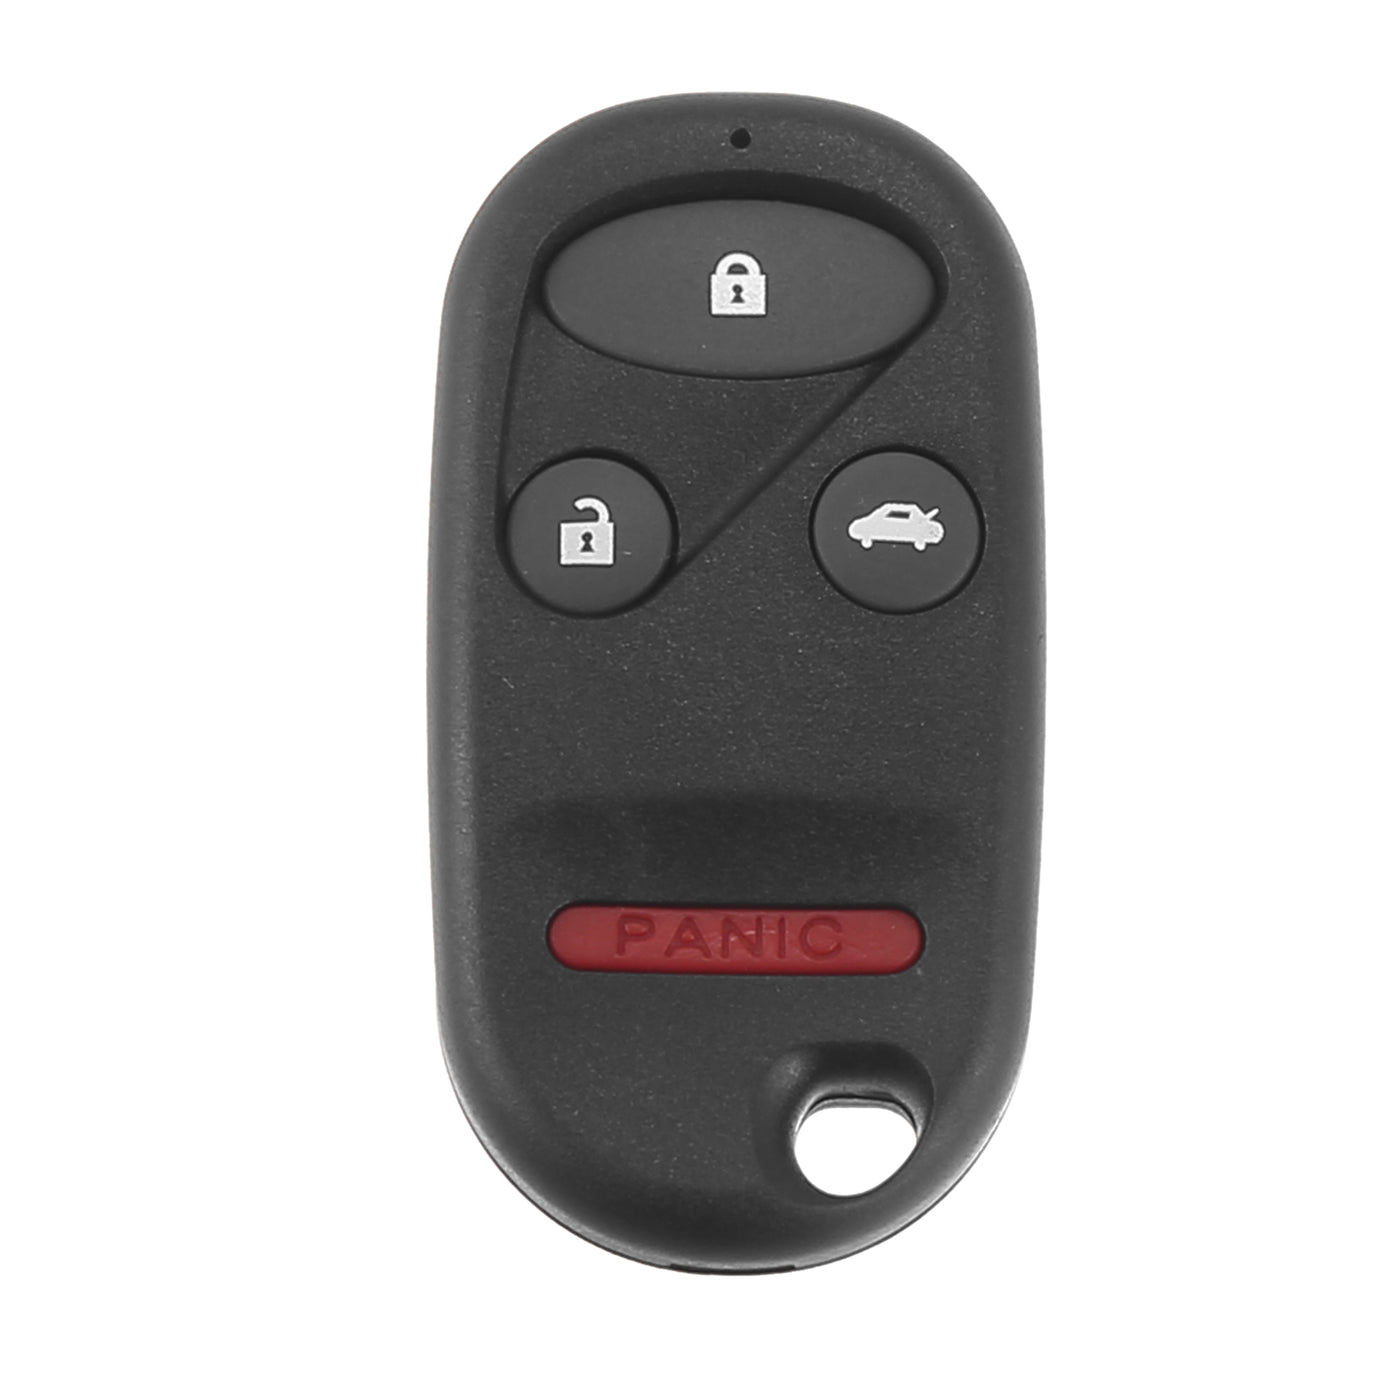 X AUTOHAUX 315MHz KOBUTAH2T Replacement Smart Proximity Keyless Entry Remote Key Fob for Honda Accord 1998-2002 for Acura TL 1999-2001 4 Buttons